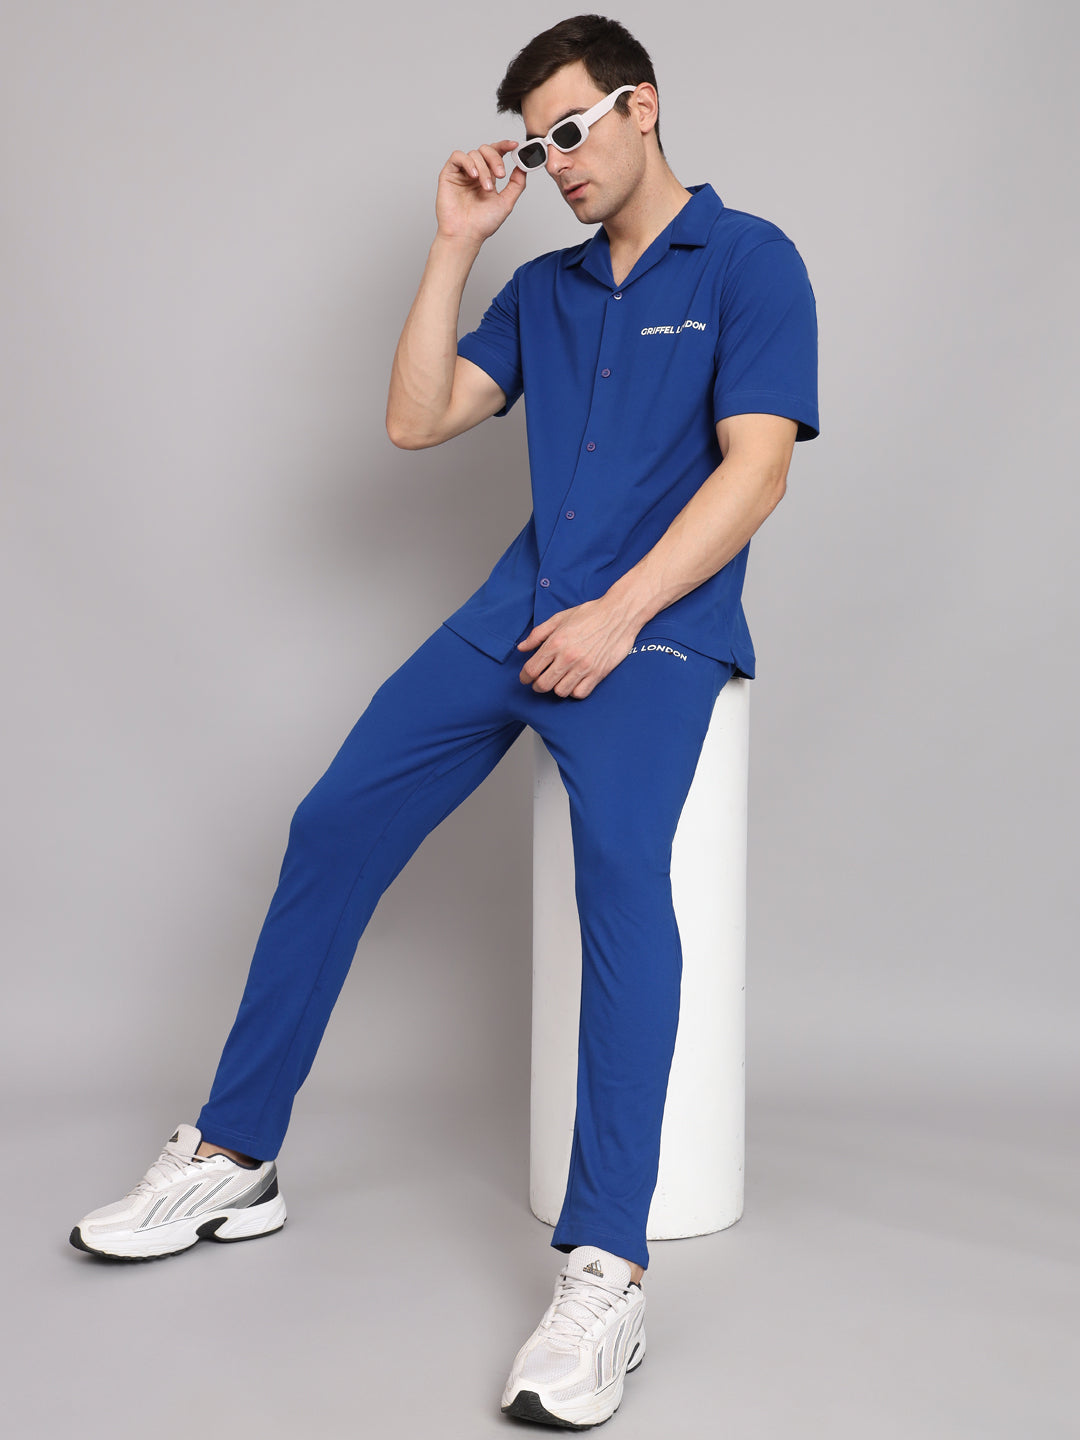 Griffel Men's Pre Winter Front Logo Solid Cotton Basic Royal Bowling Shirt and Joggers Full Co-Ord Set - griffel